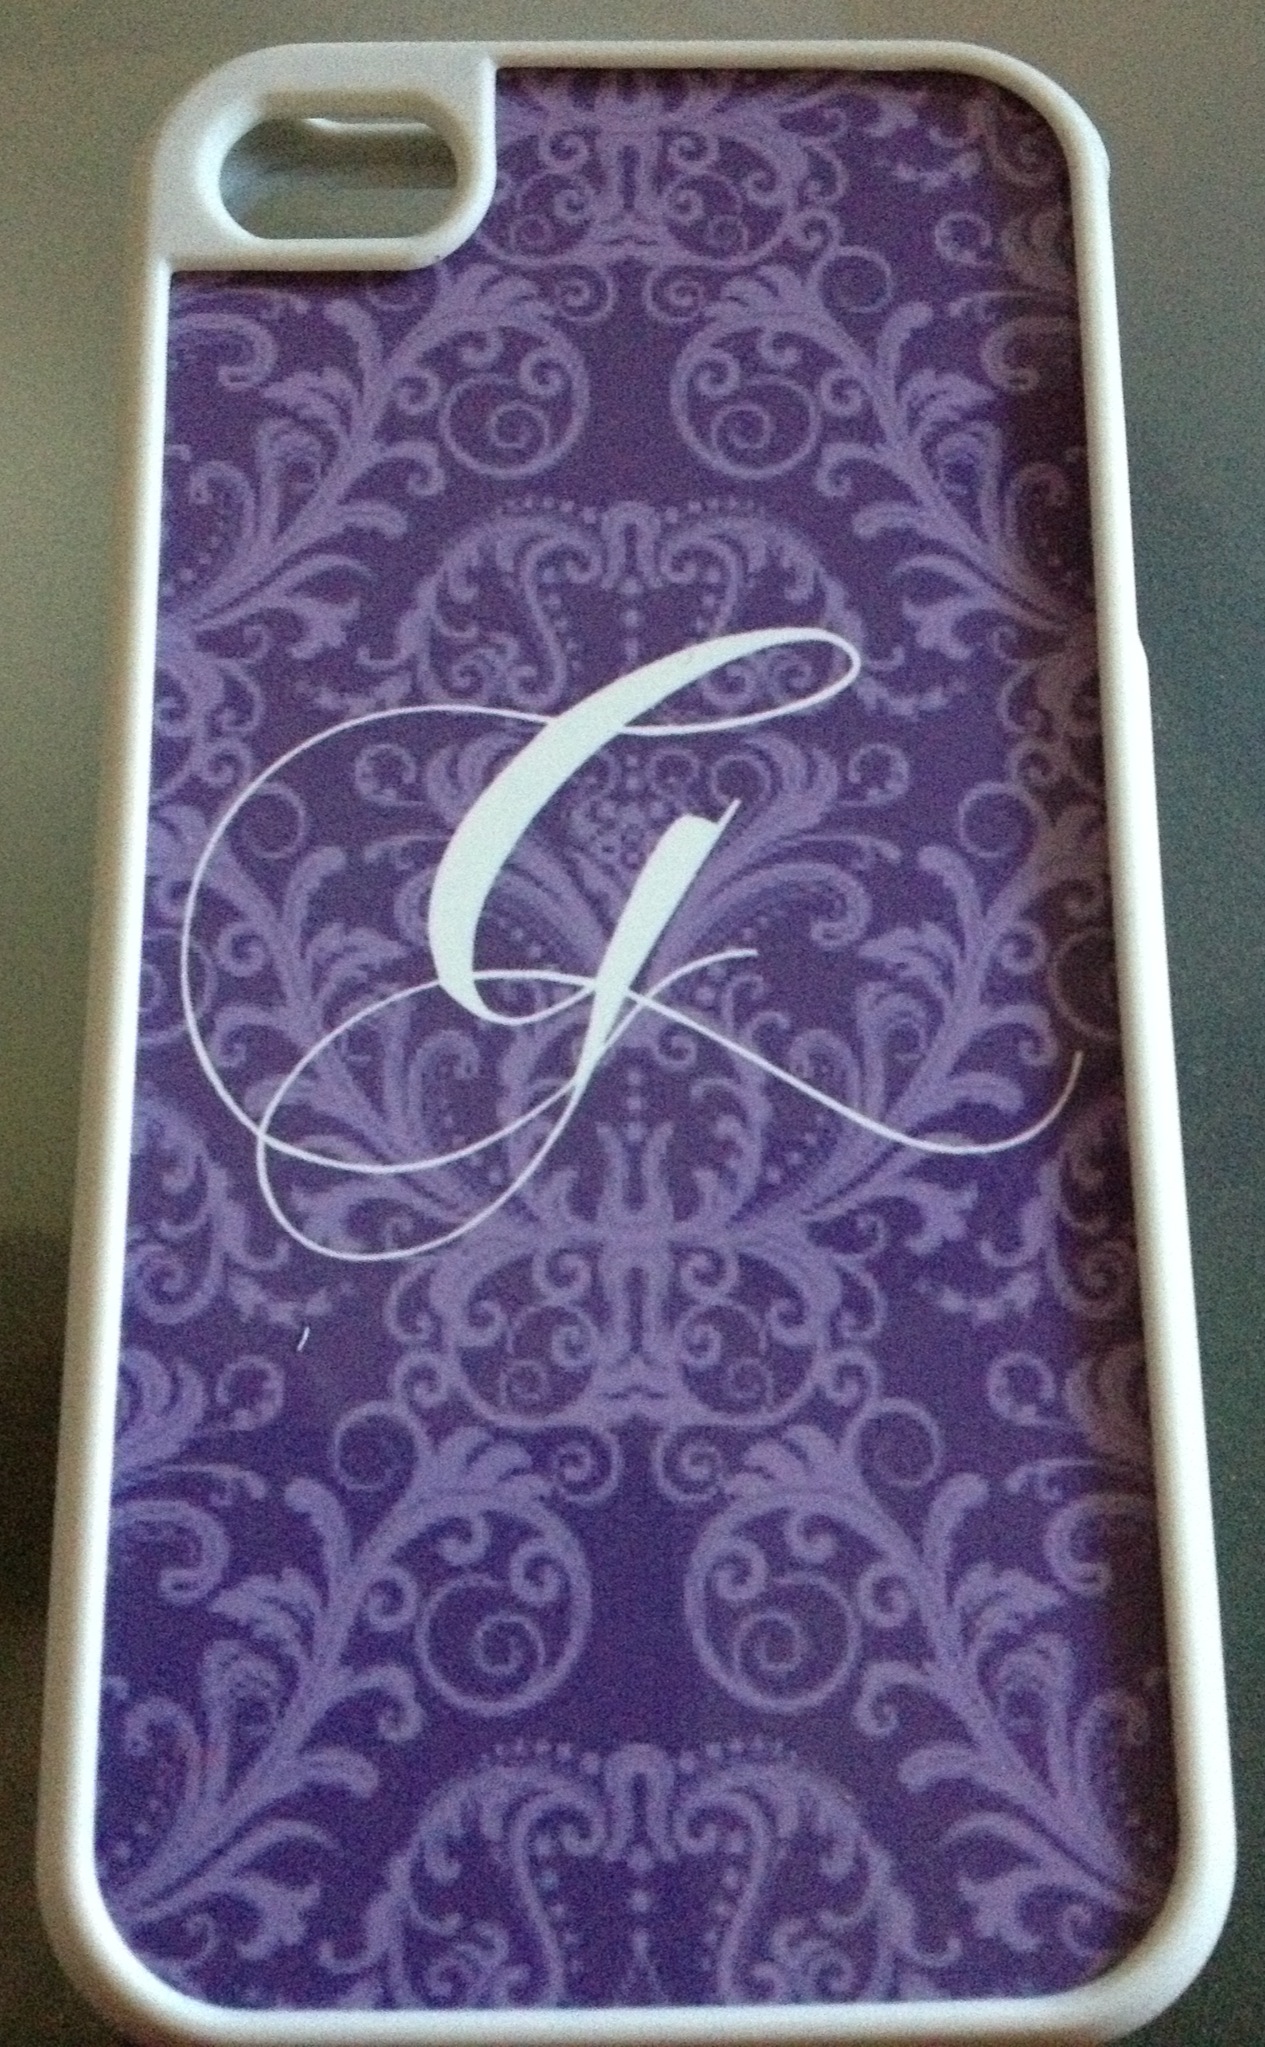 Purple iphone case made with sublimation printing